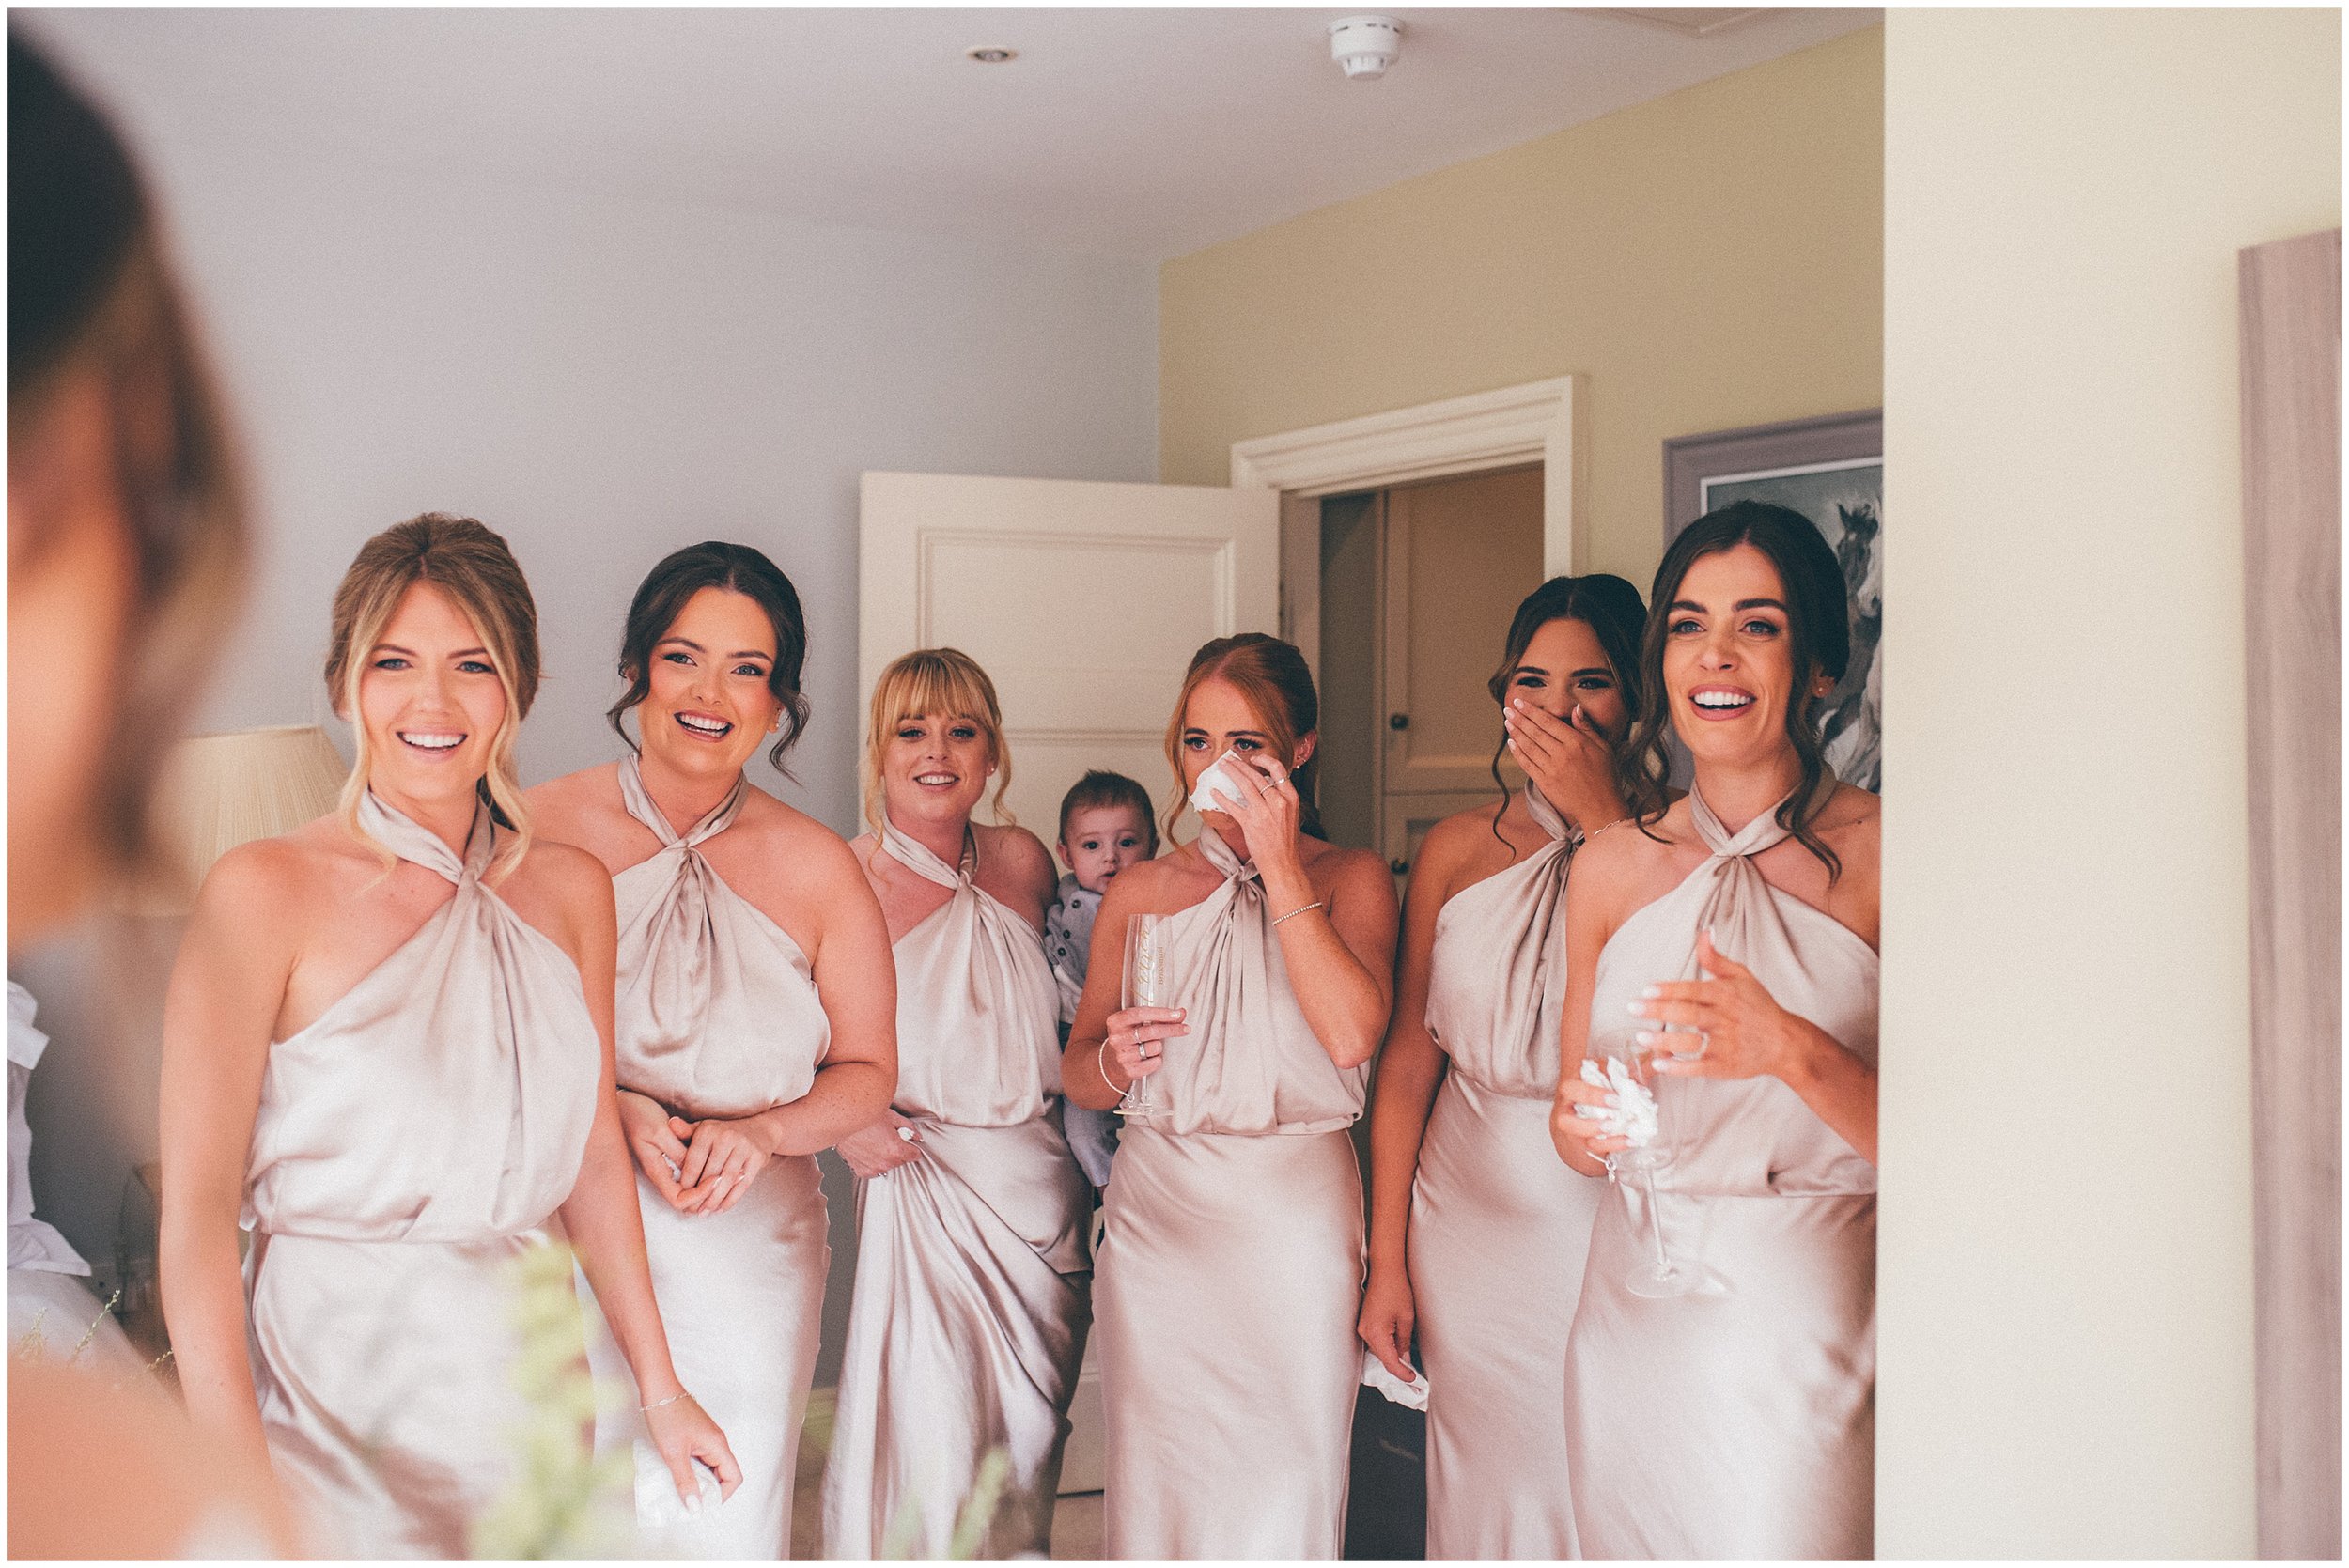 Bridesmaids have a first look with the bride in her wedding dress at Abbeywood Estate  in Delamere, Cheshire